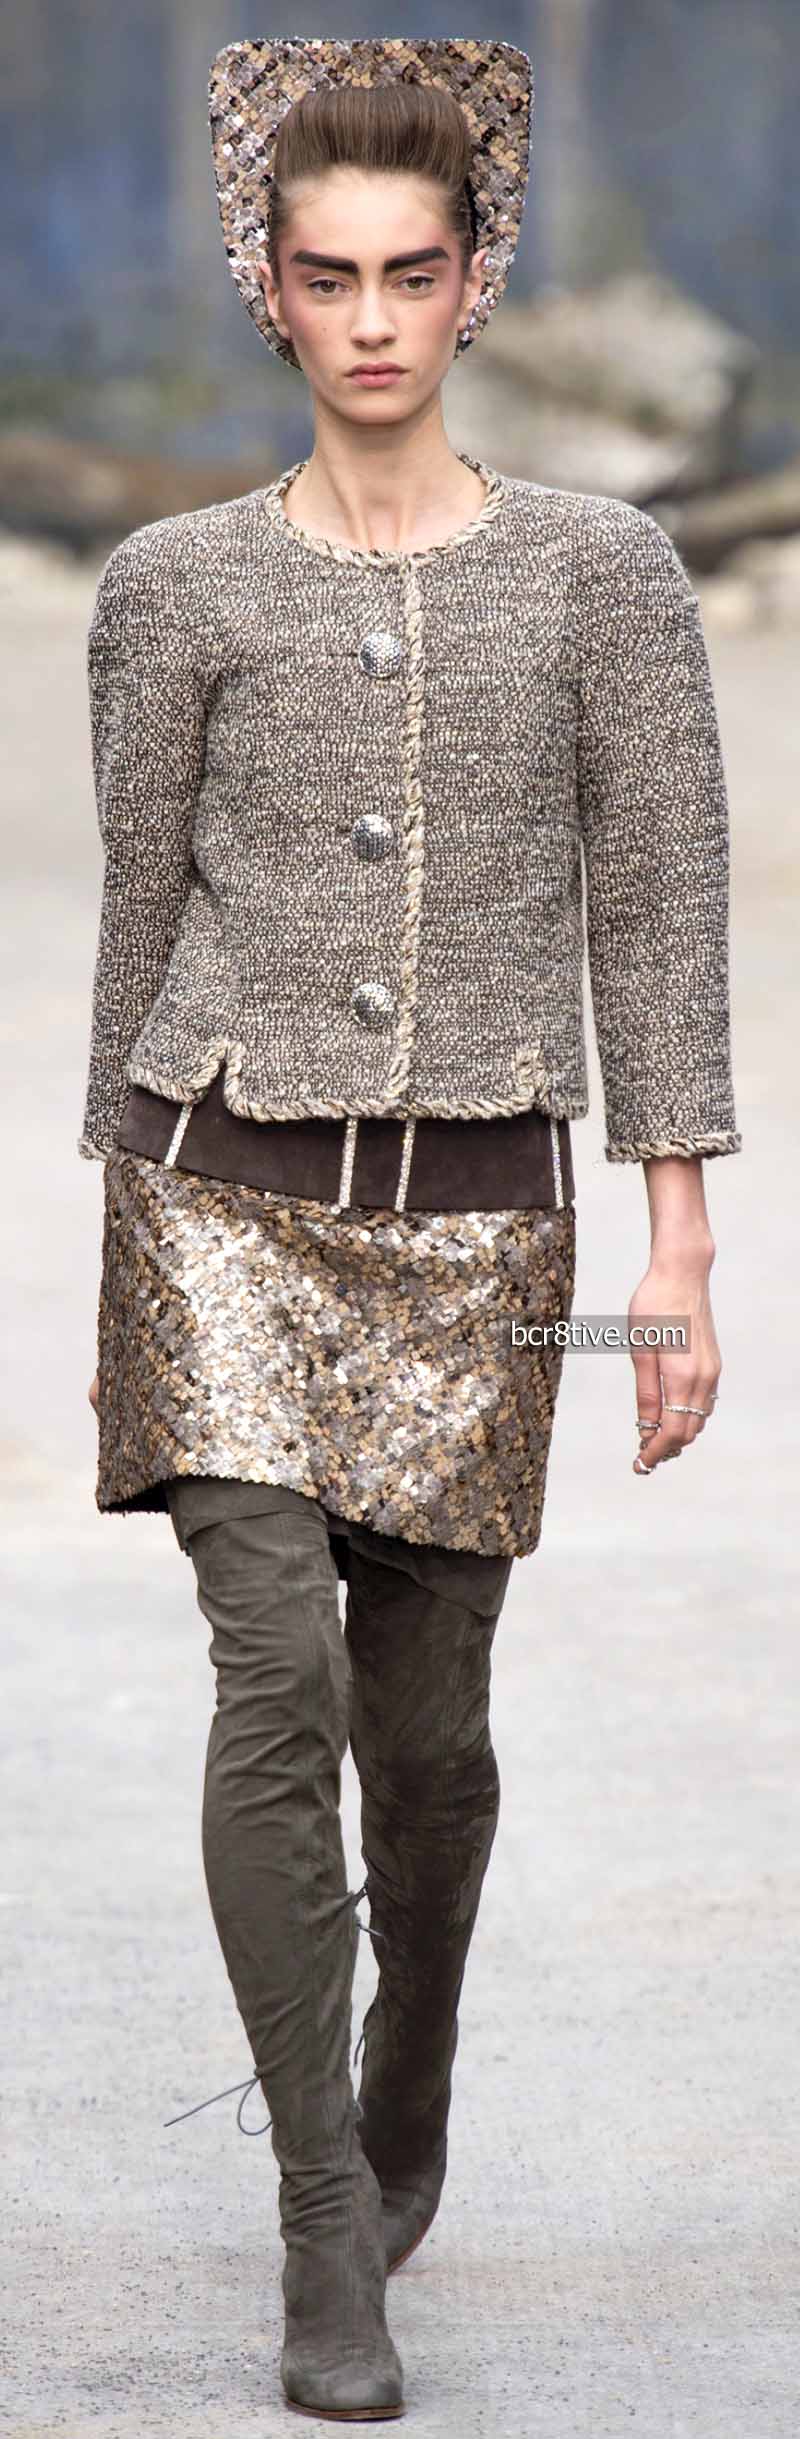 Chanel Fall Winter 2013-14 Haute Couture Collection – Be Creative